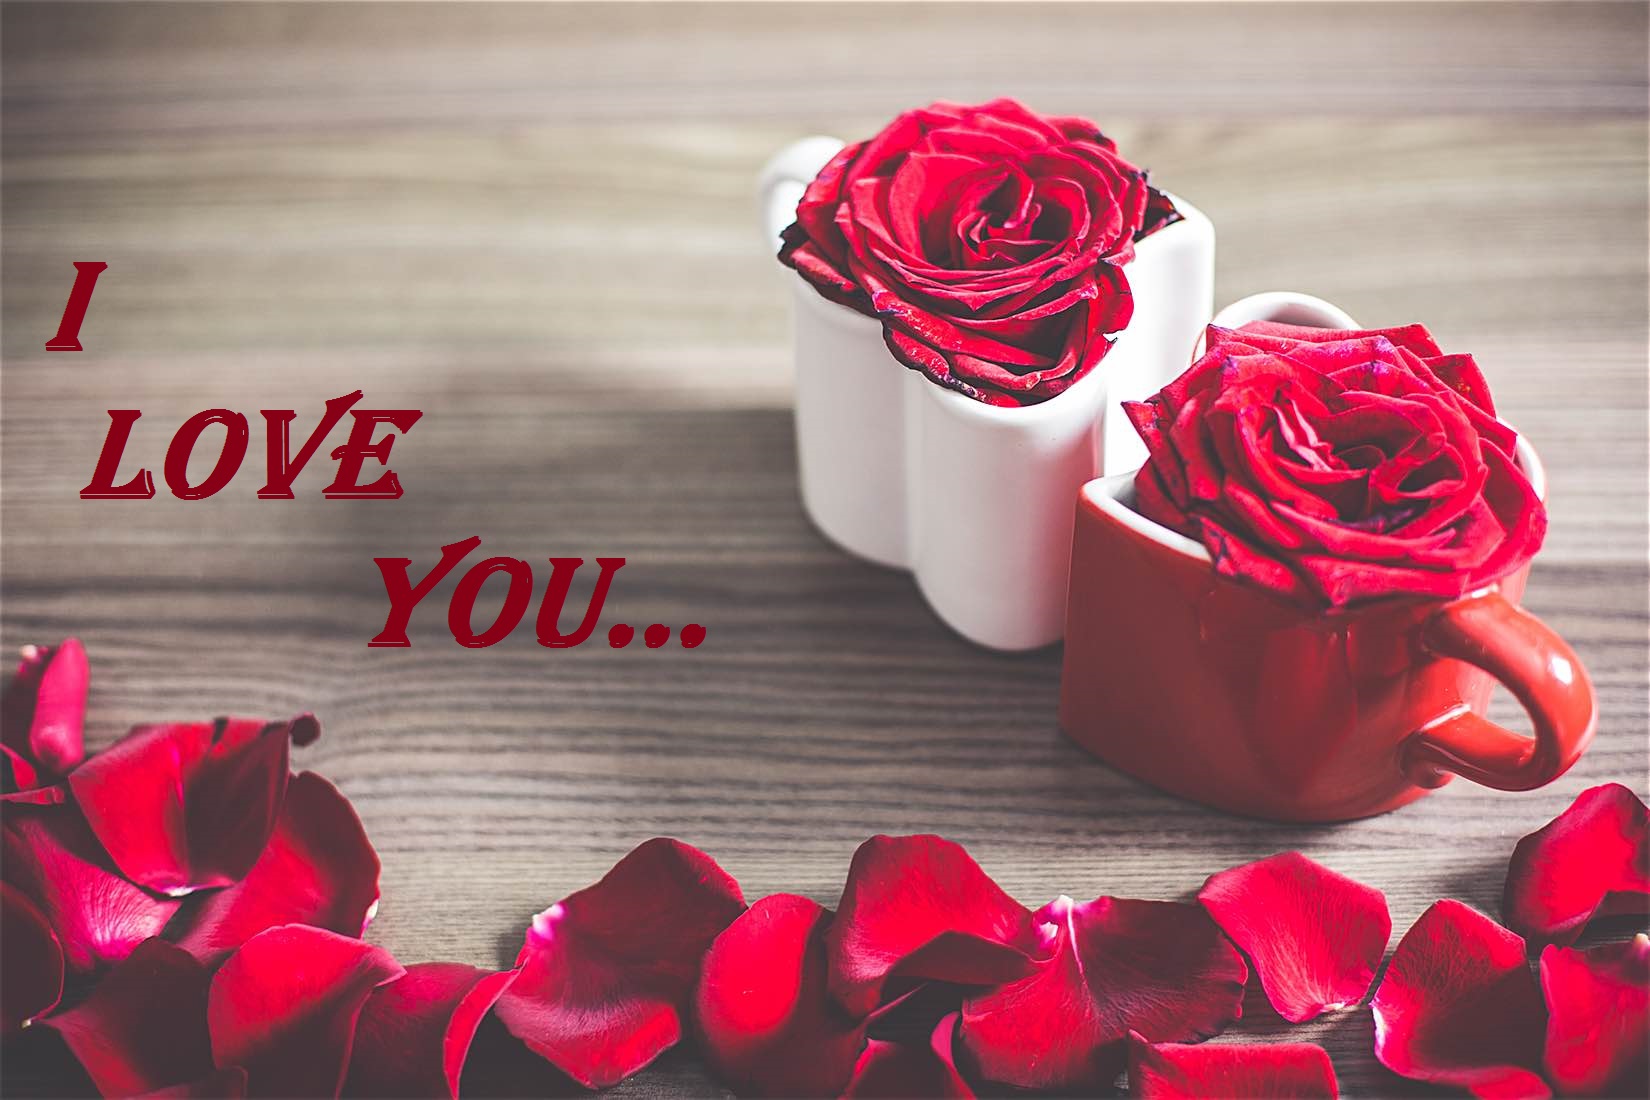 Beautiful I Love You Images hd pictures free download